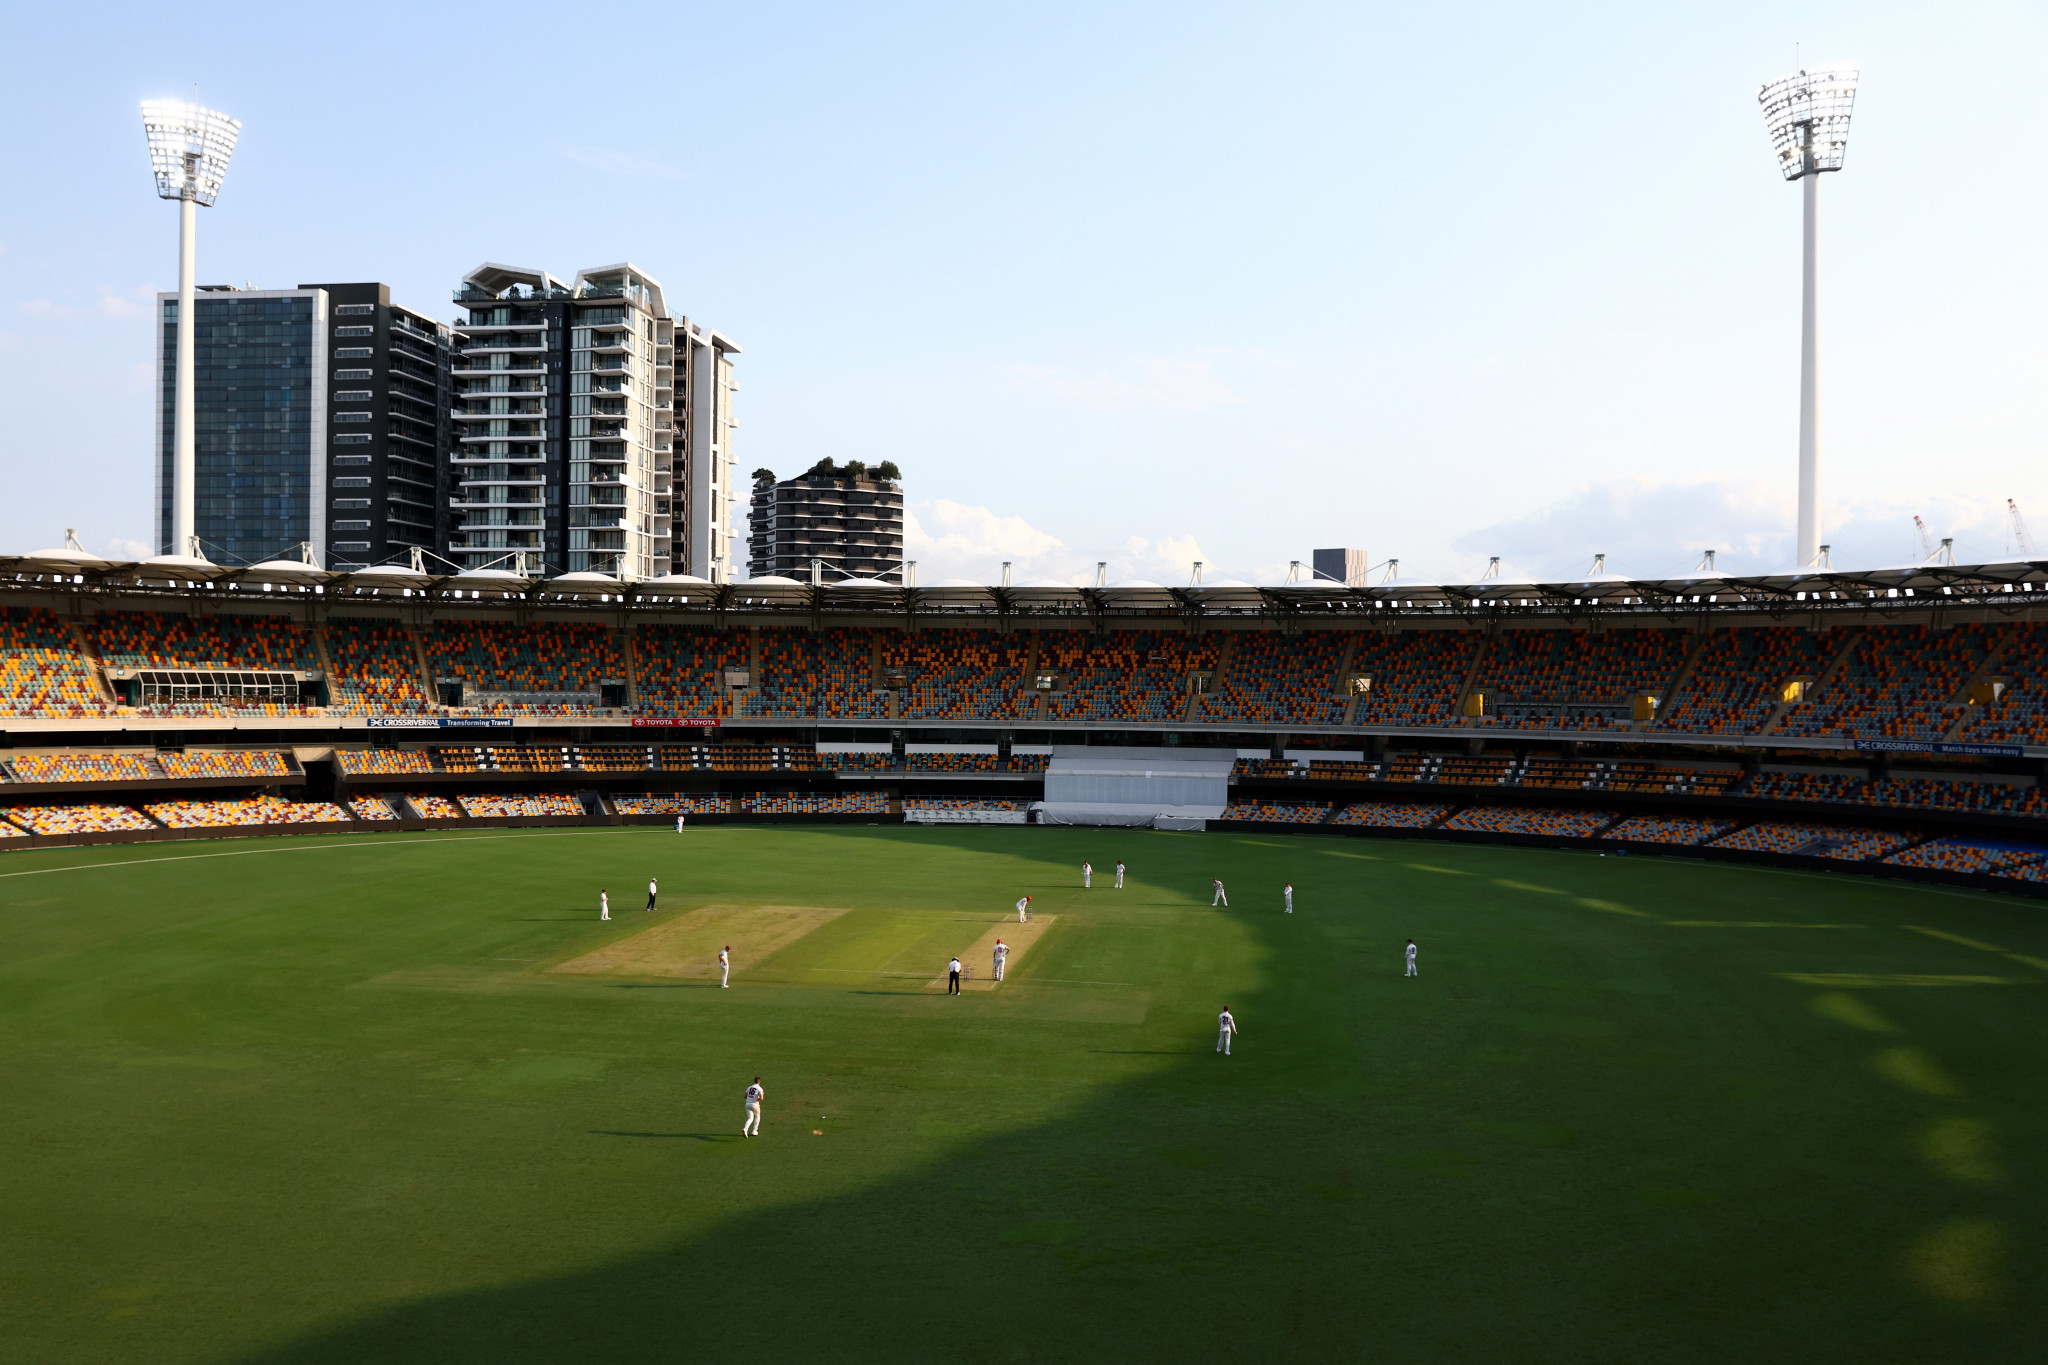 Plans to completely rebuild the Gabba cricket ground for the 2032 Olympics could force the relocation of two local schools ©Getty Images